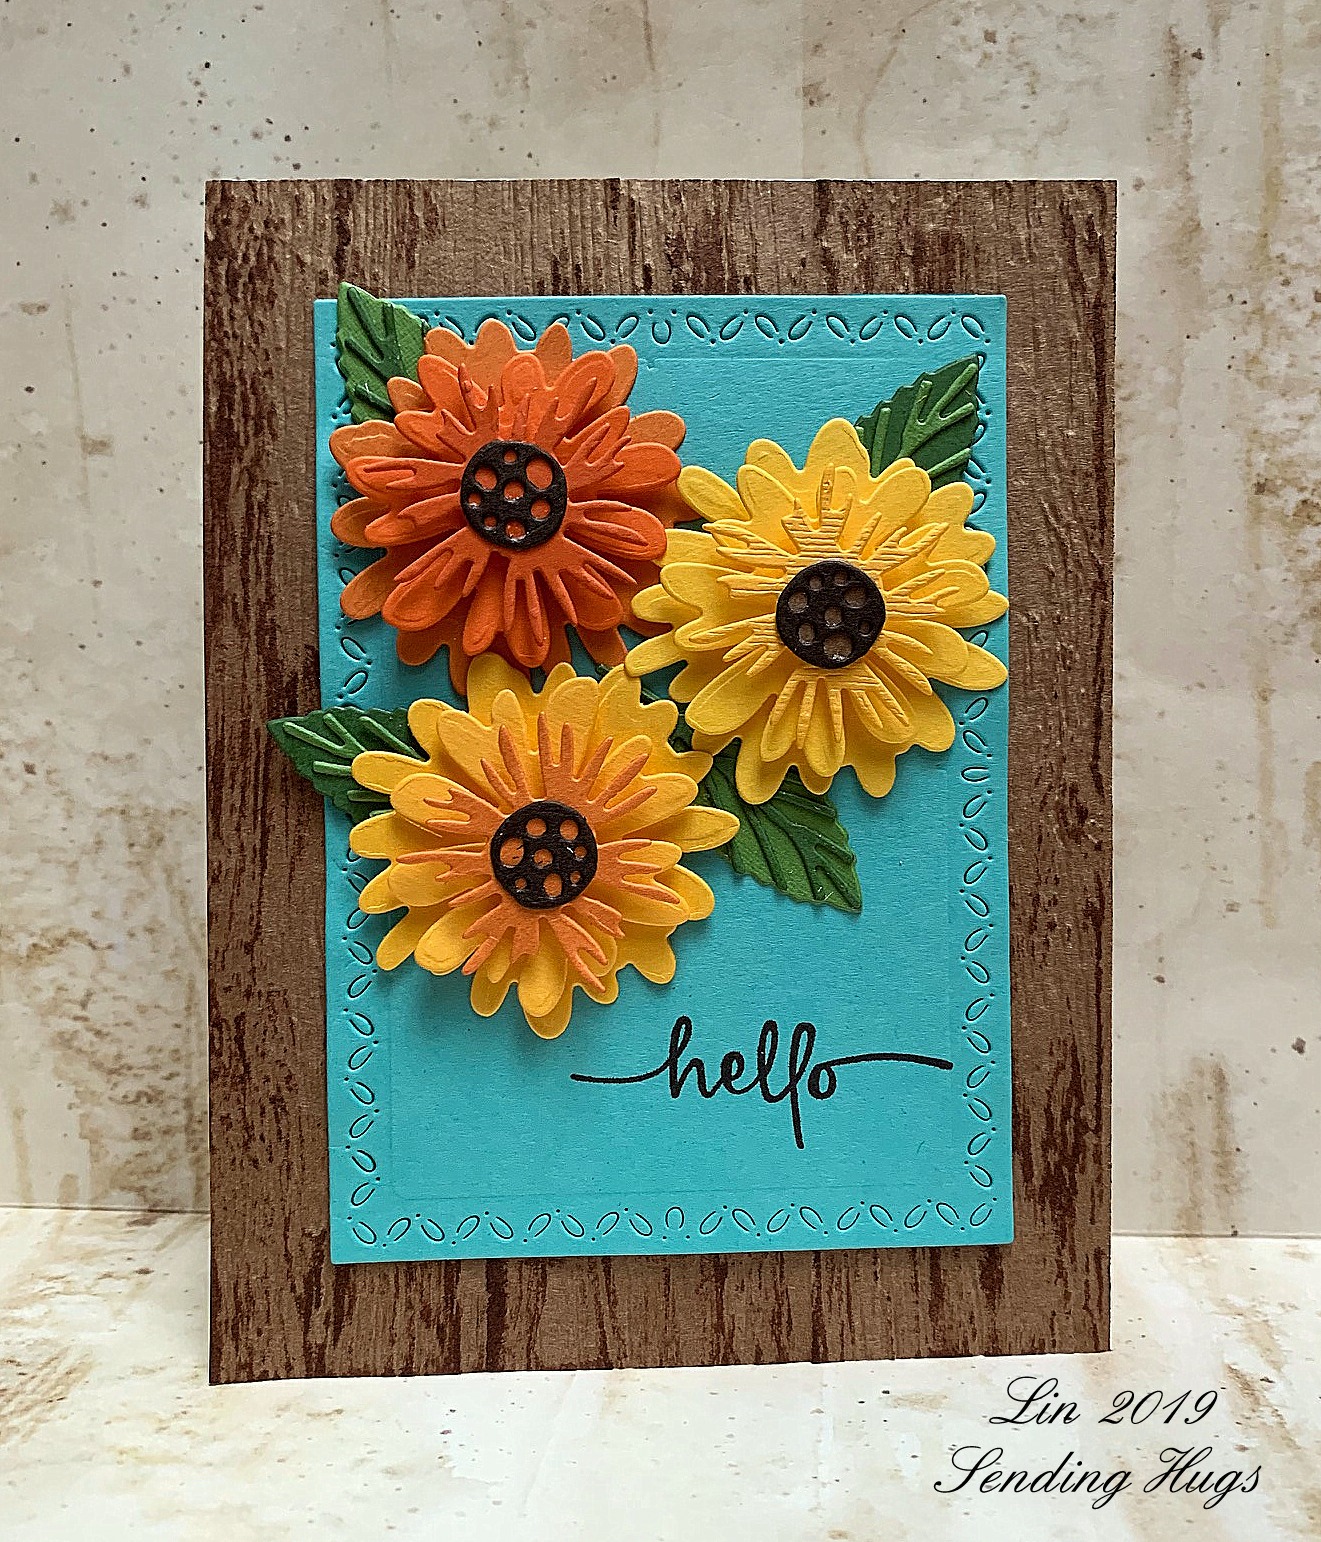 MFT Peaceful Wildflowers Stamp and Die Sets  Inspirational cards, Simple  cards, Tim holtz distress ink